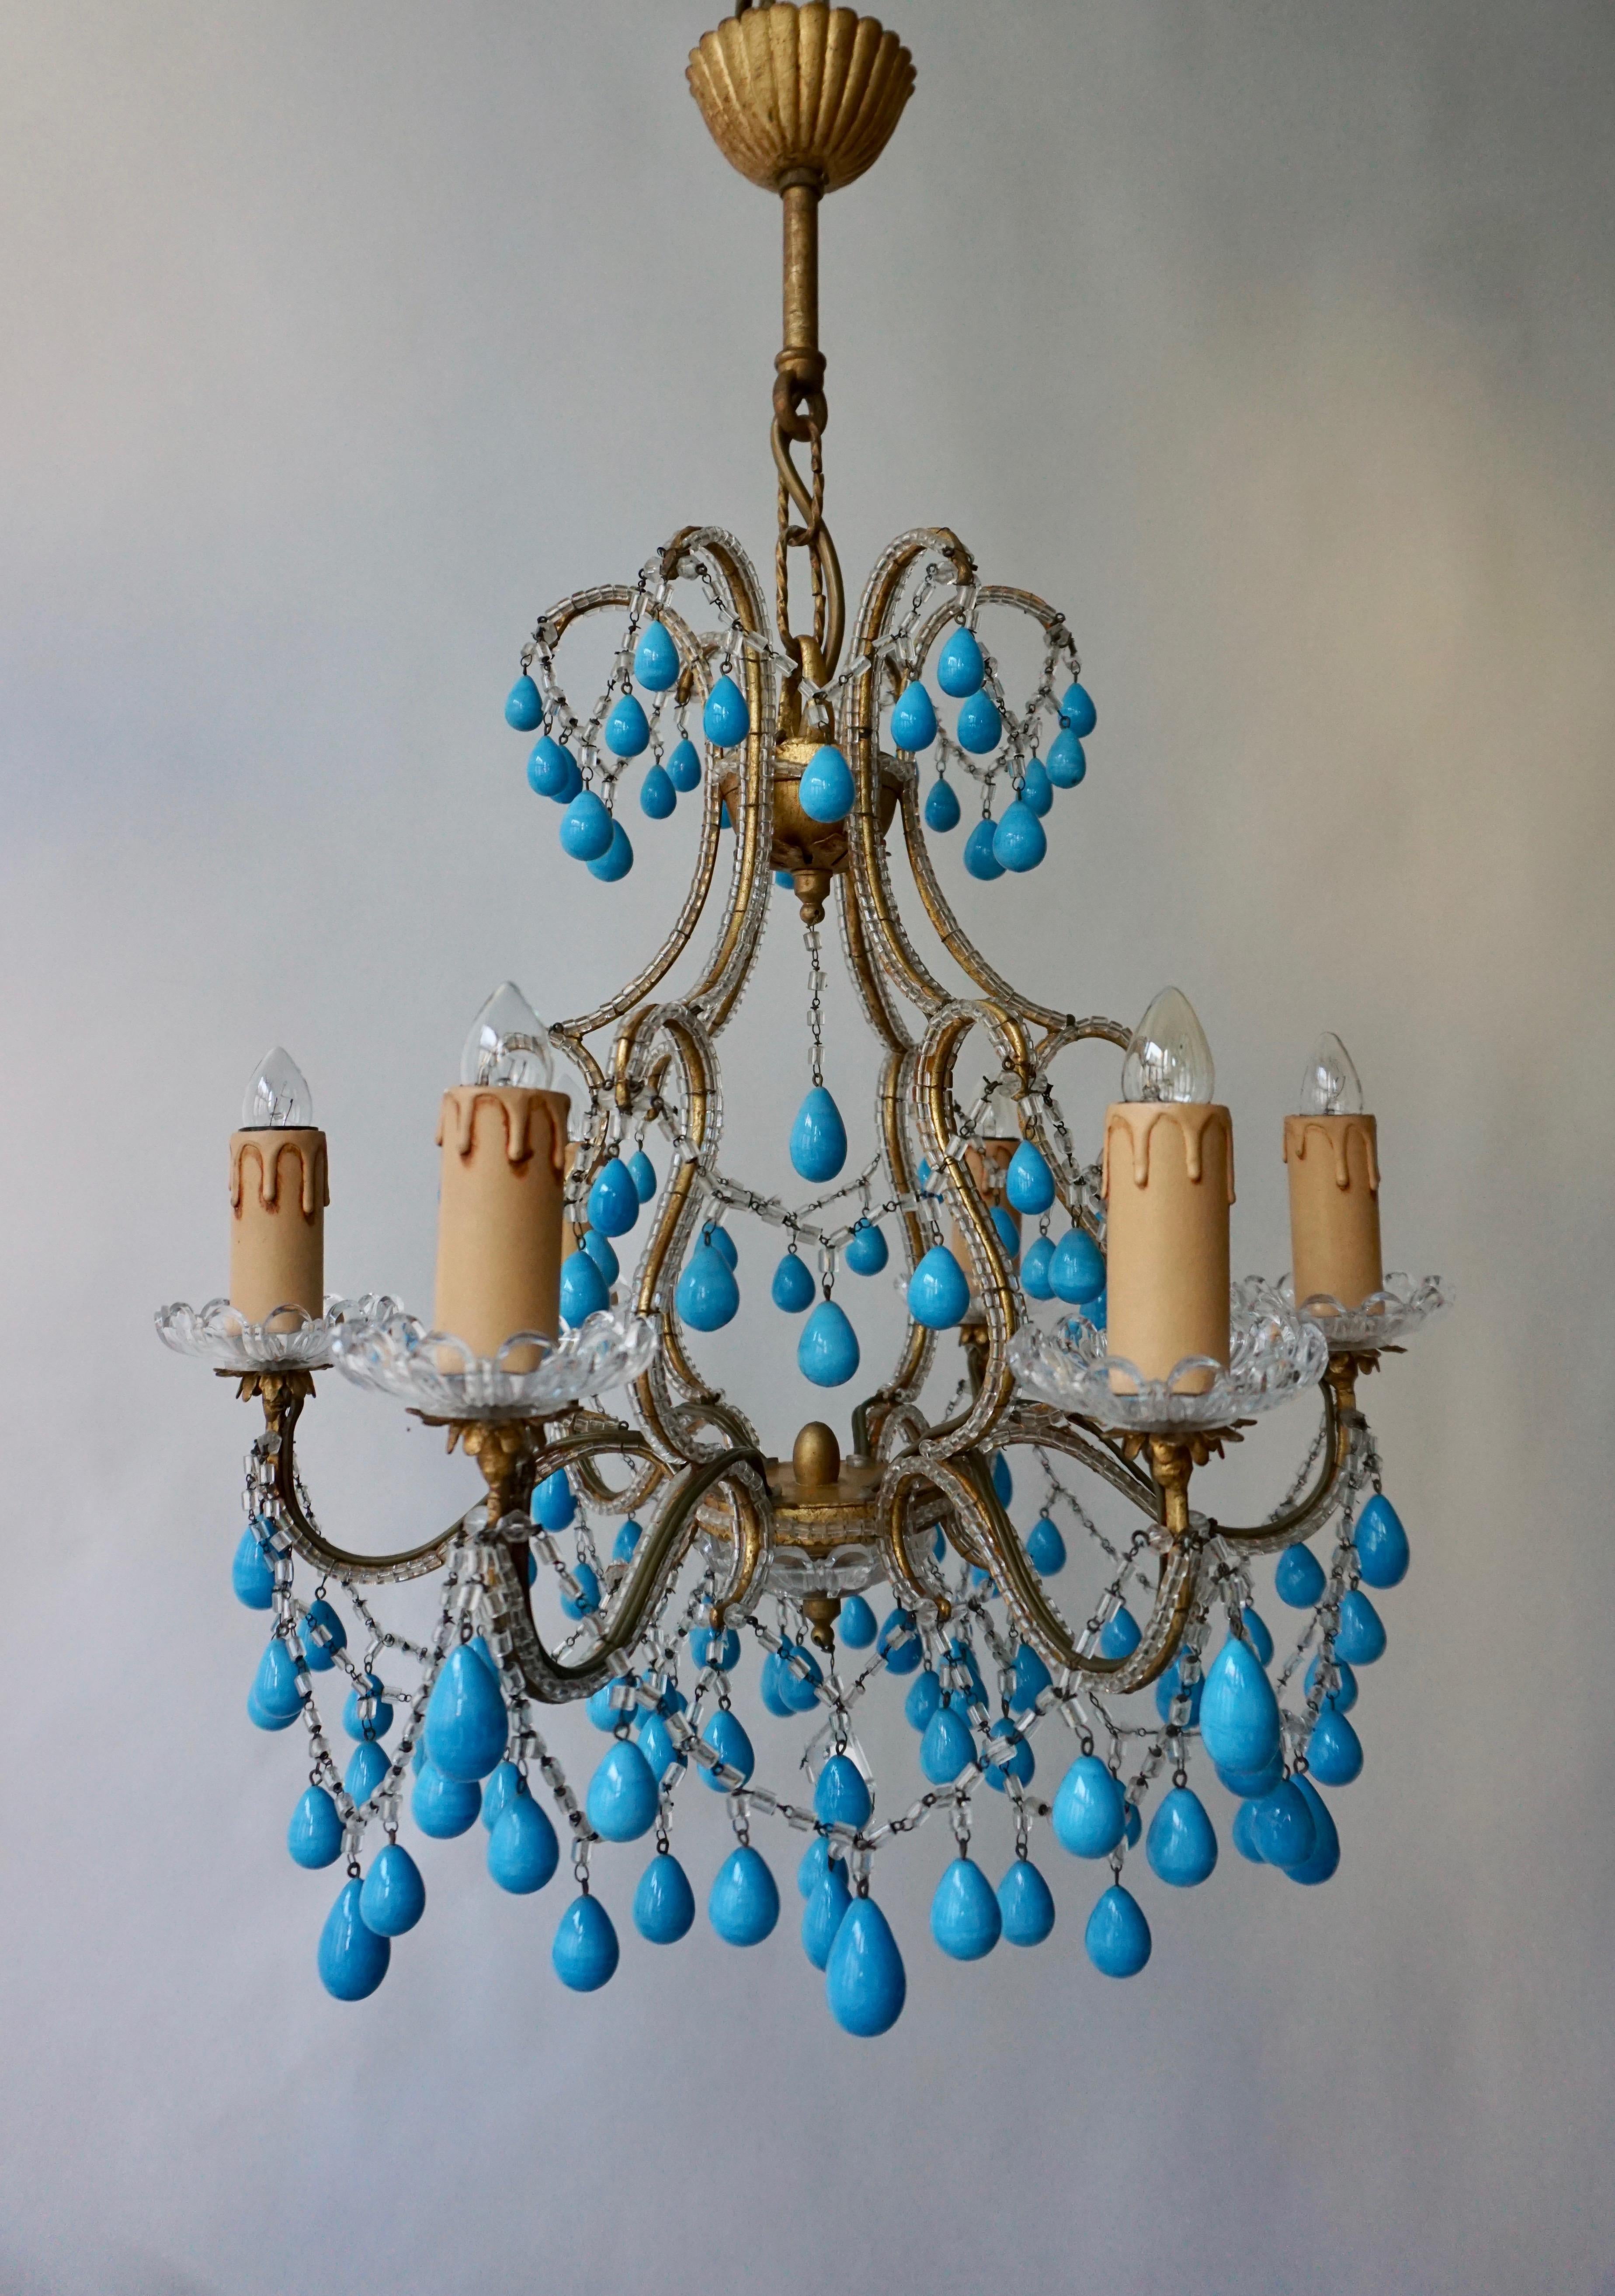 Pair of Elegant Italian Chandeliers with Turquoise Stone For Sale 2